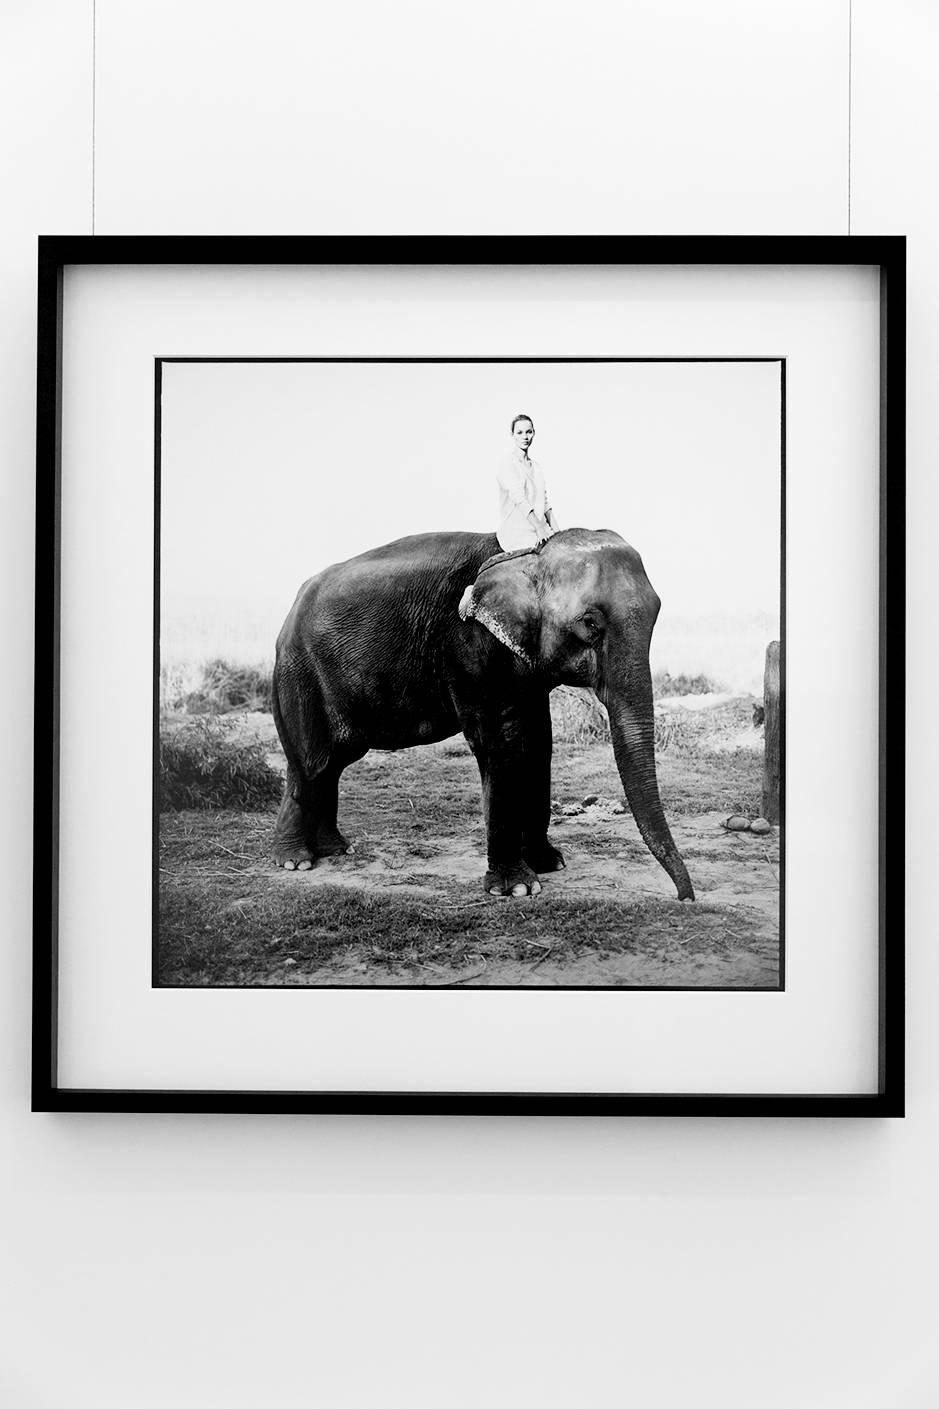 Kate Moss in Nepal, British Vogue - Model on elephant, fine art photography 1993 - Photograph by Arthur Elgort